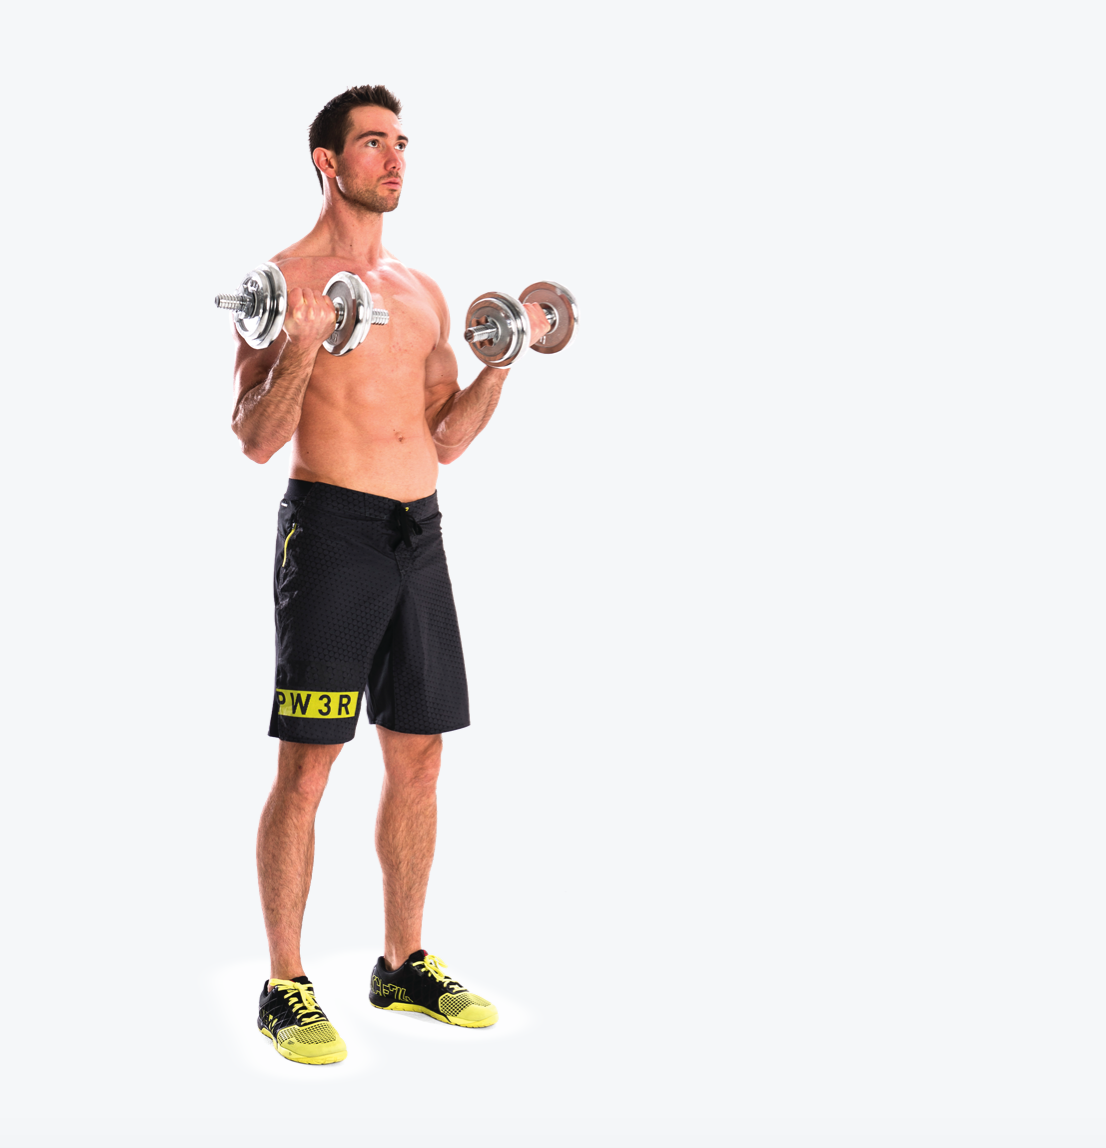 Home dumbbell shoulders and arms workout Men's Fitness UK